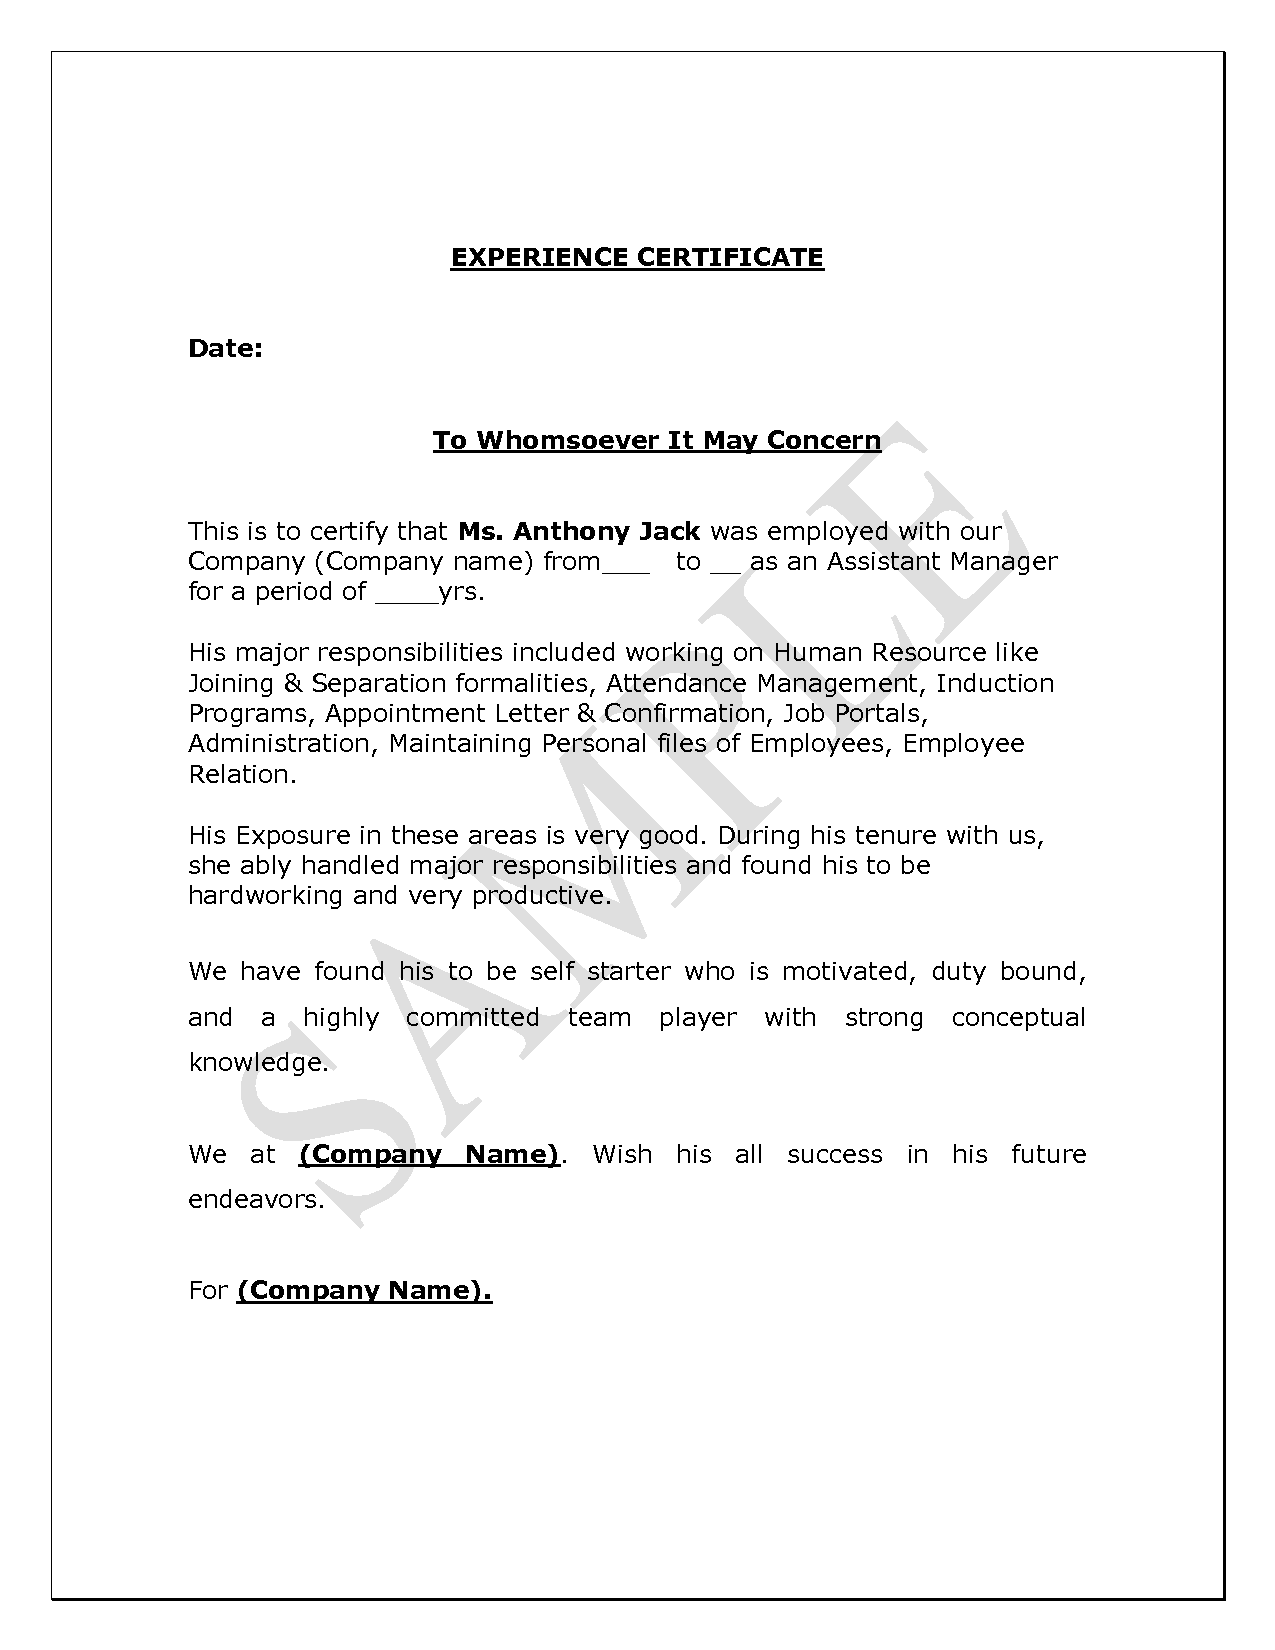 how to write application letter for experience certificate